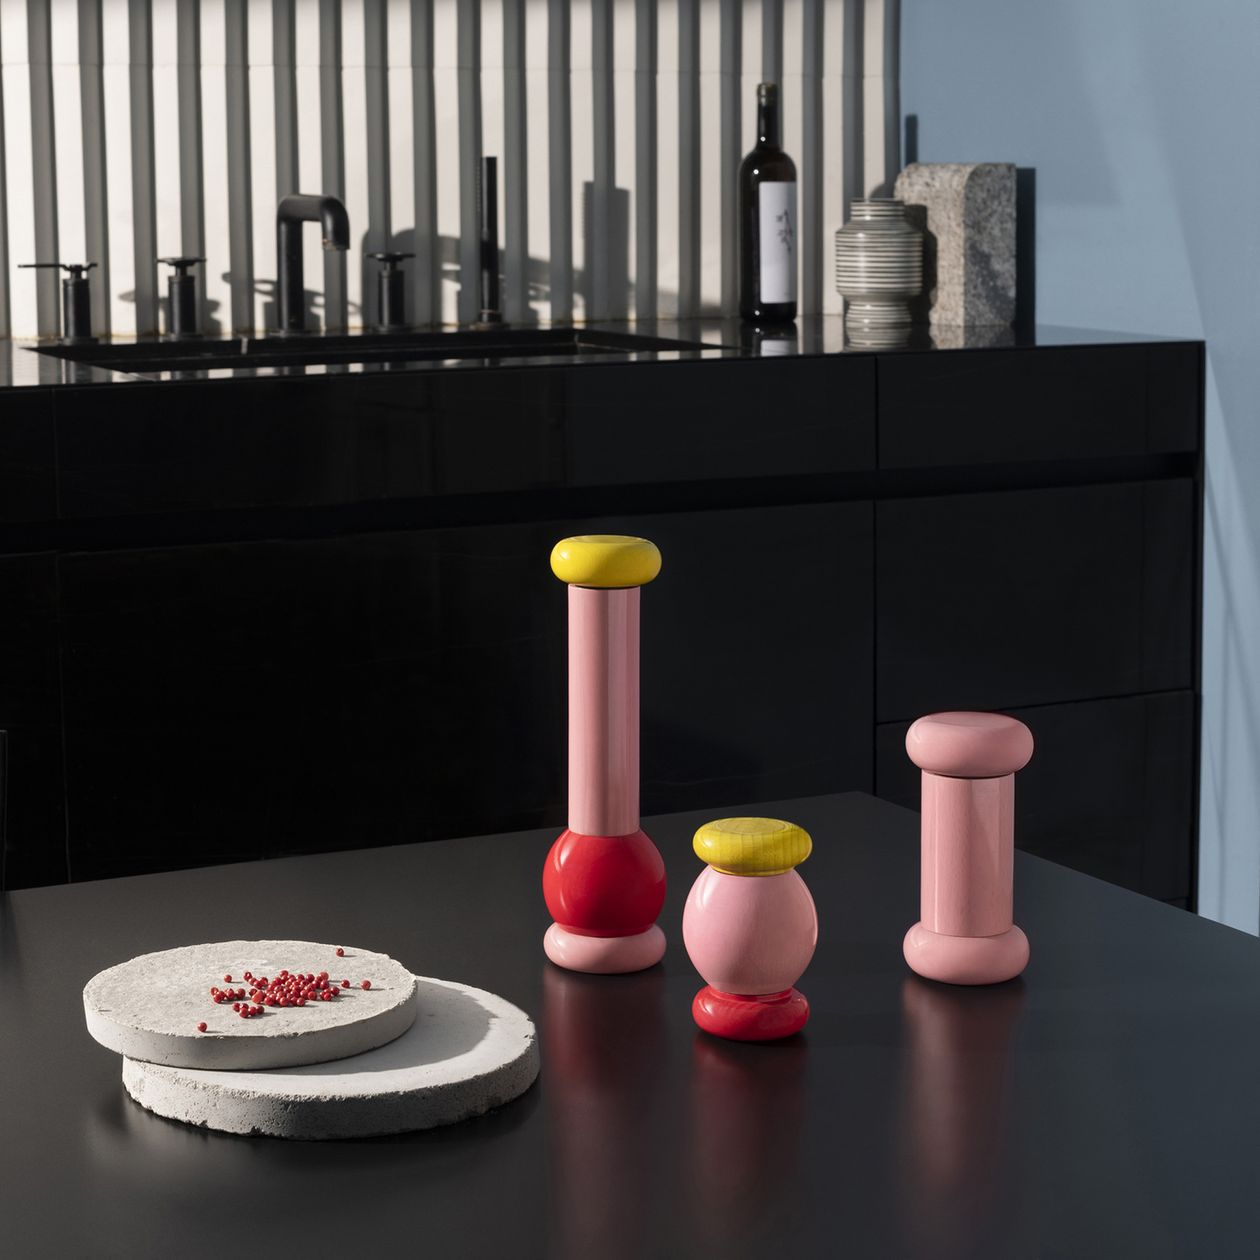 Alessi Ettore Sottsass grinder, pink